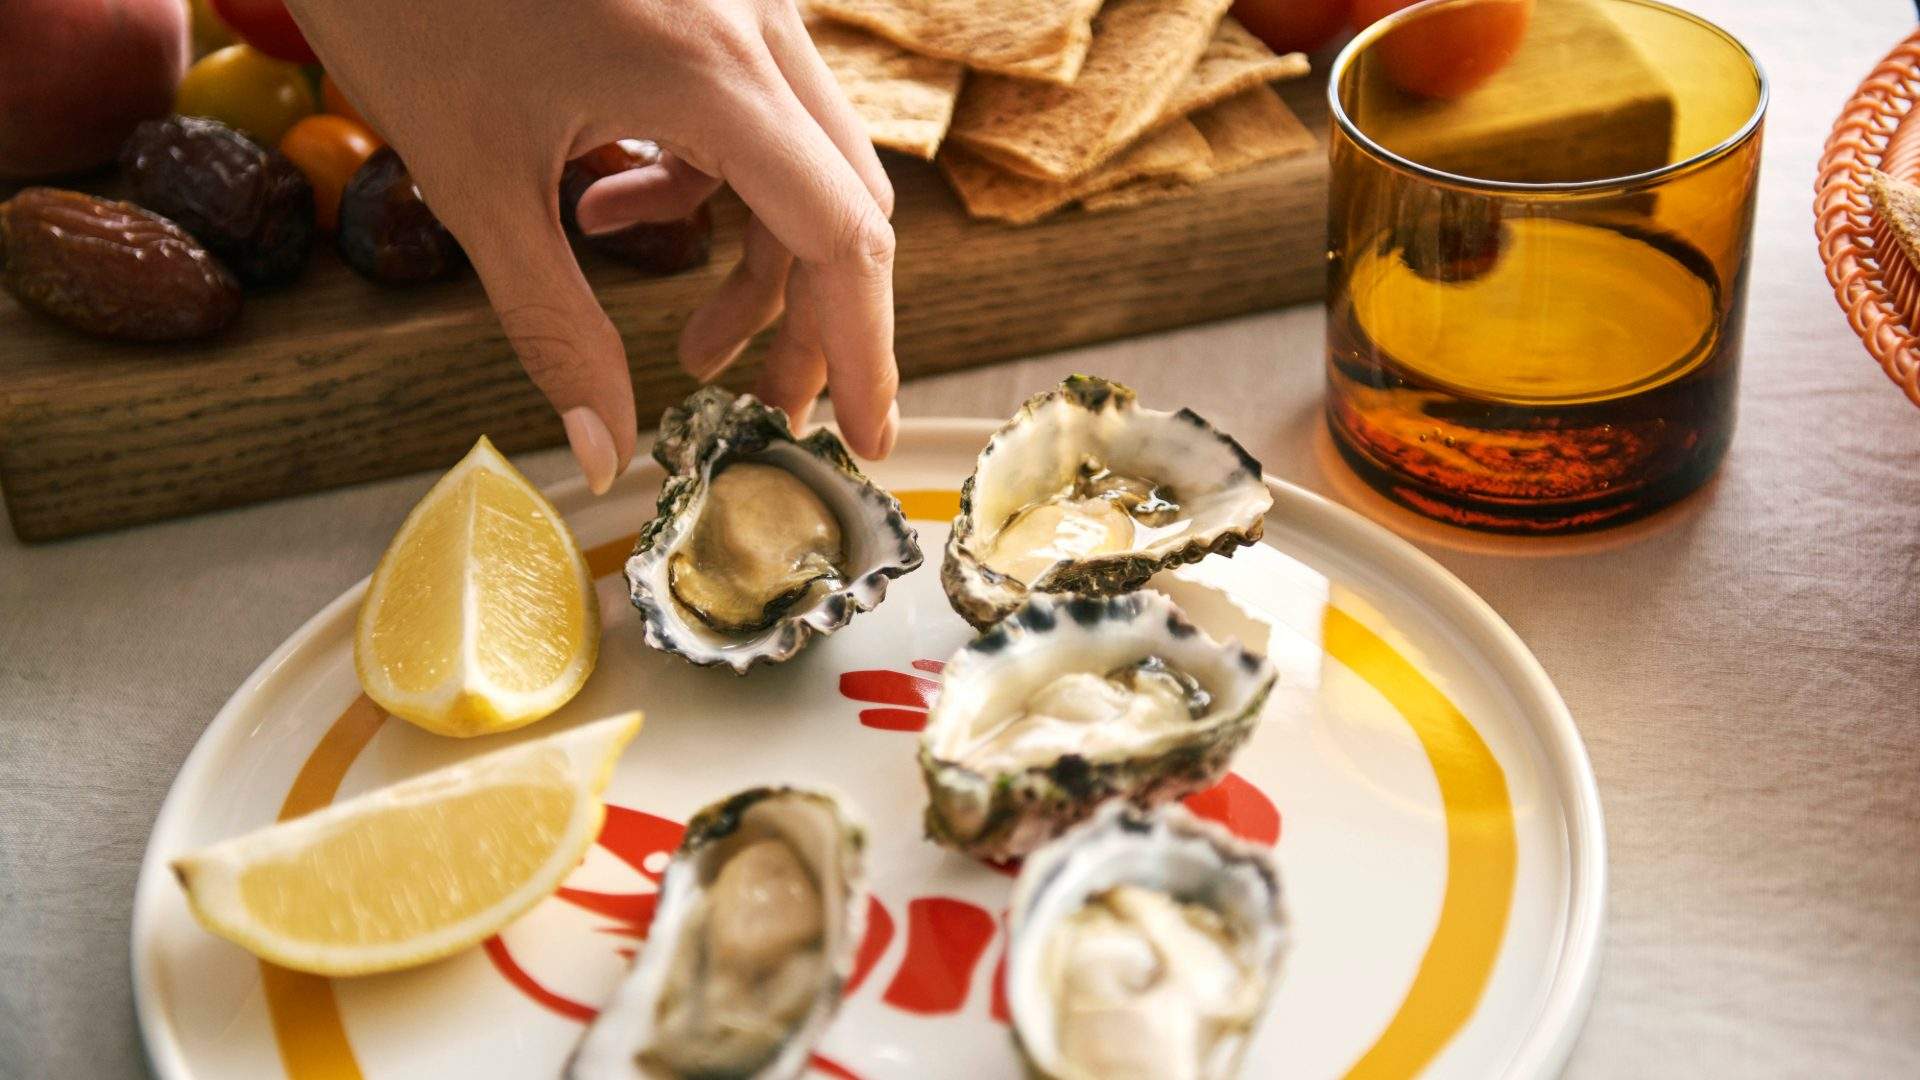 East 33 Is Melbourne's New Home-Delivery Service Dropping A-Class Oysters to Your Doorstep